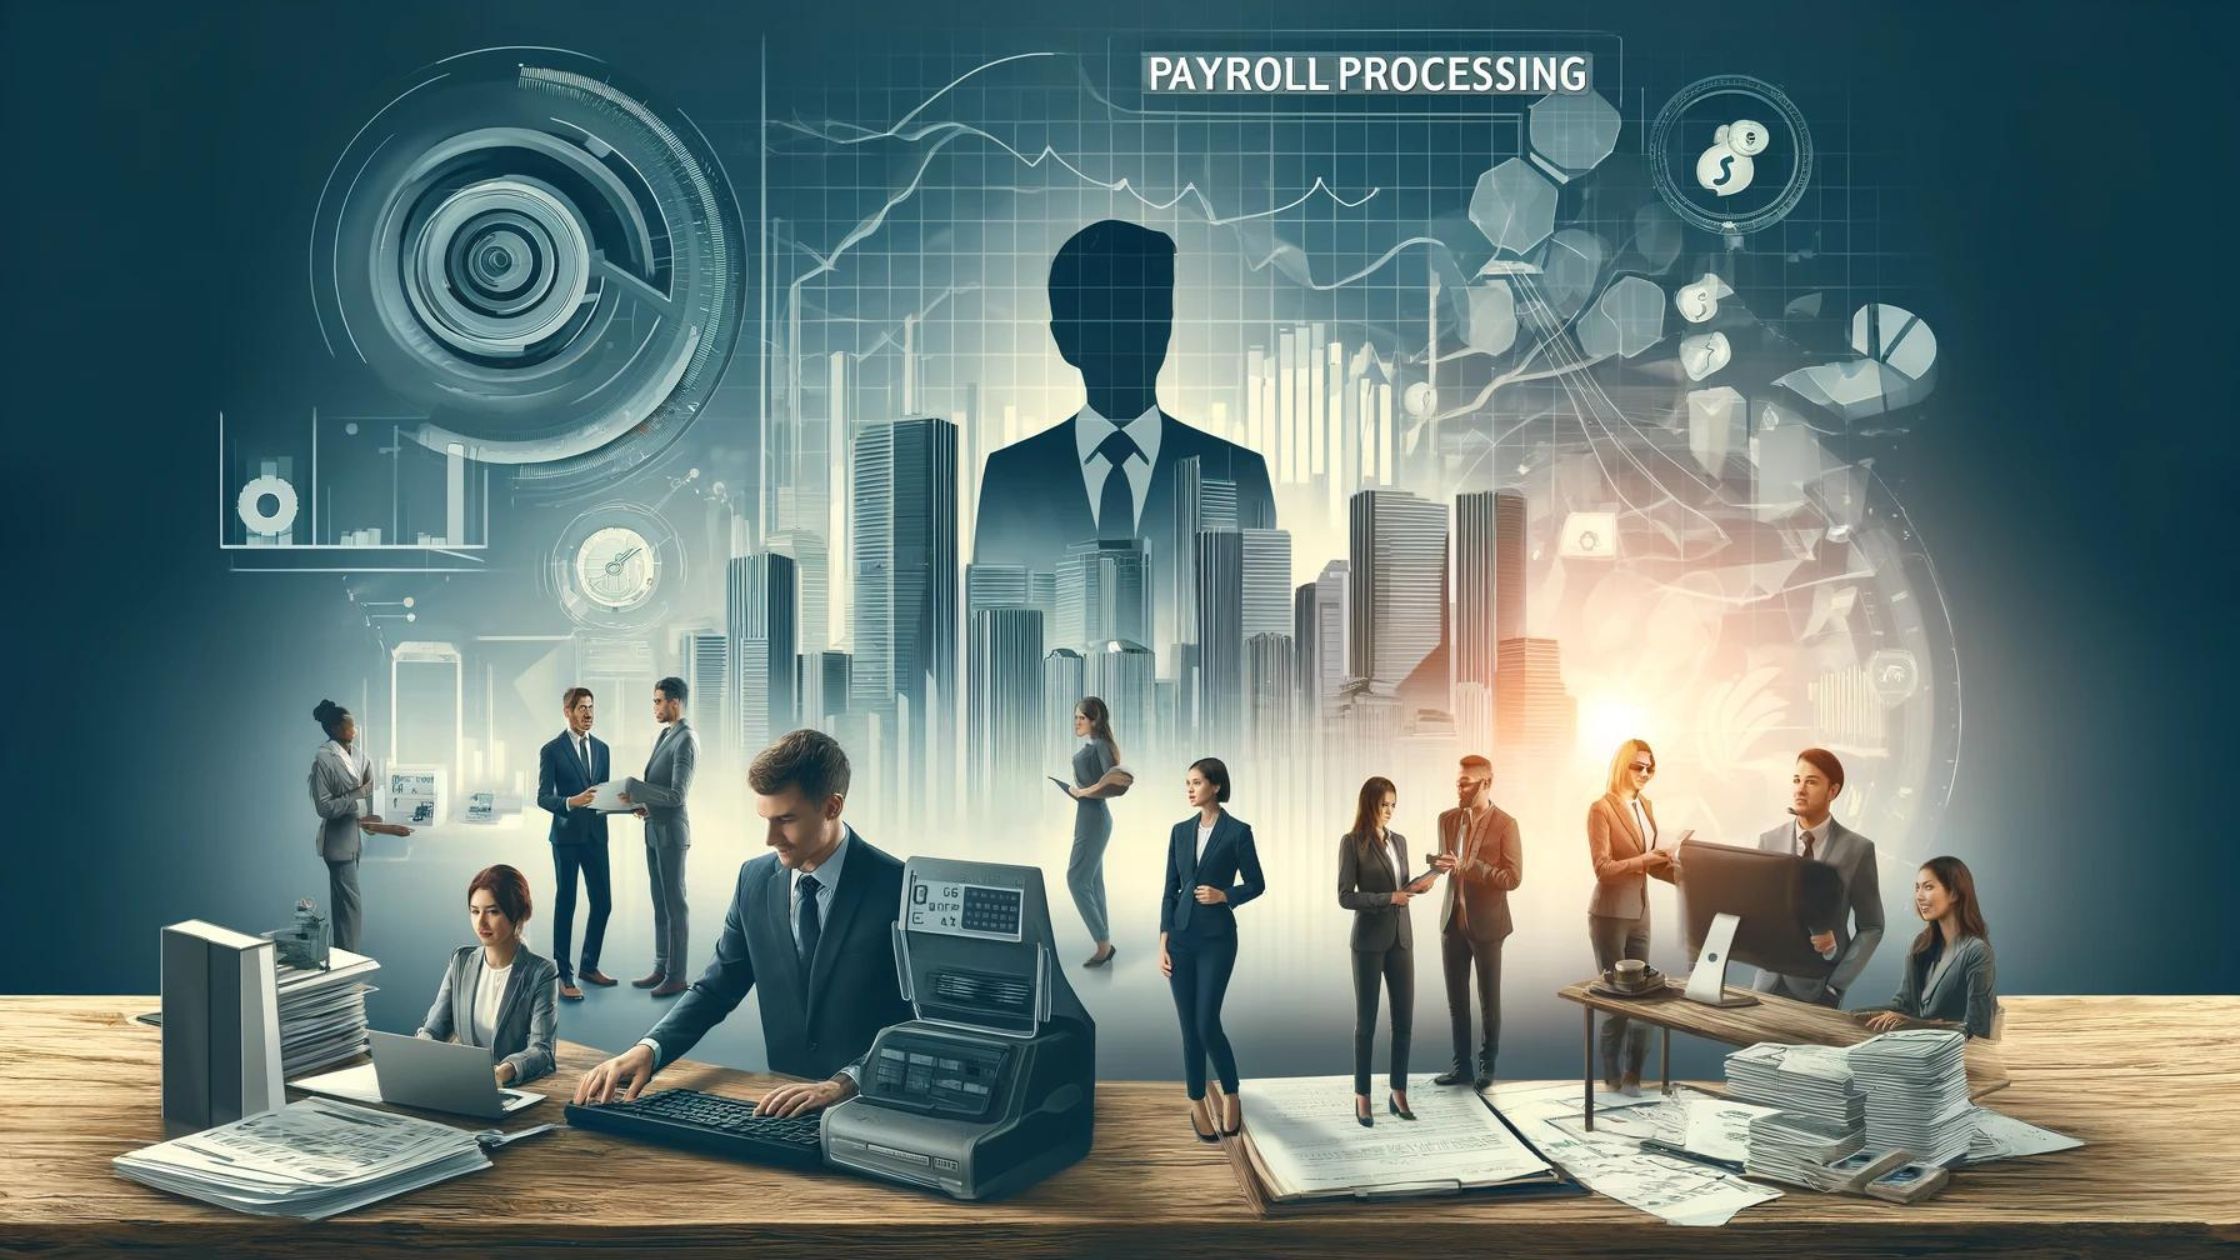 What Should I Look for in a Payroll Service Provider